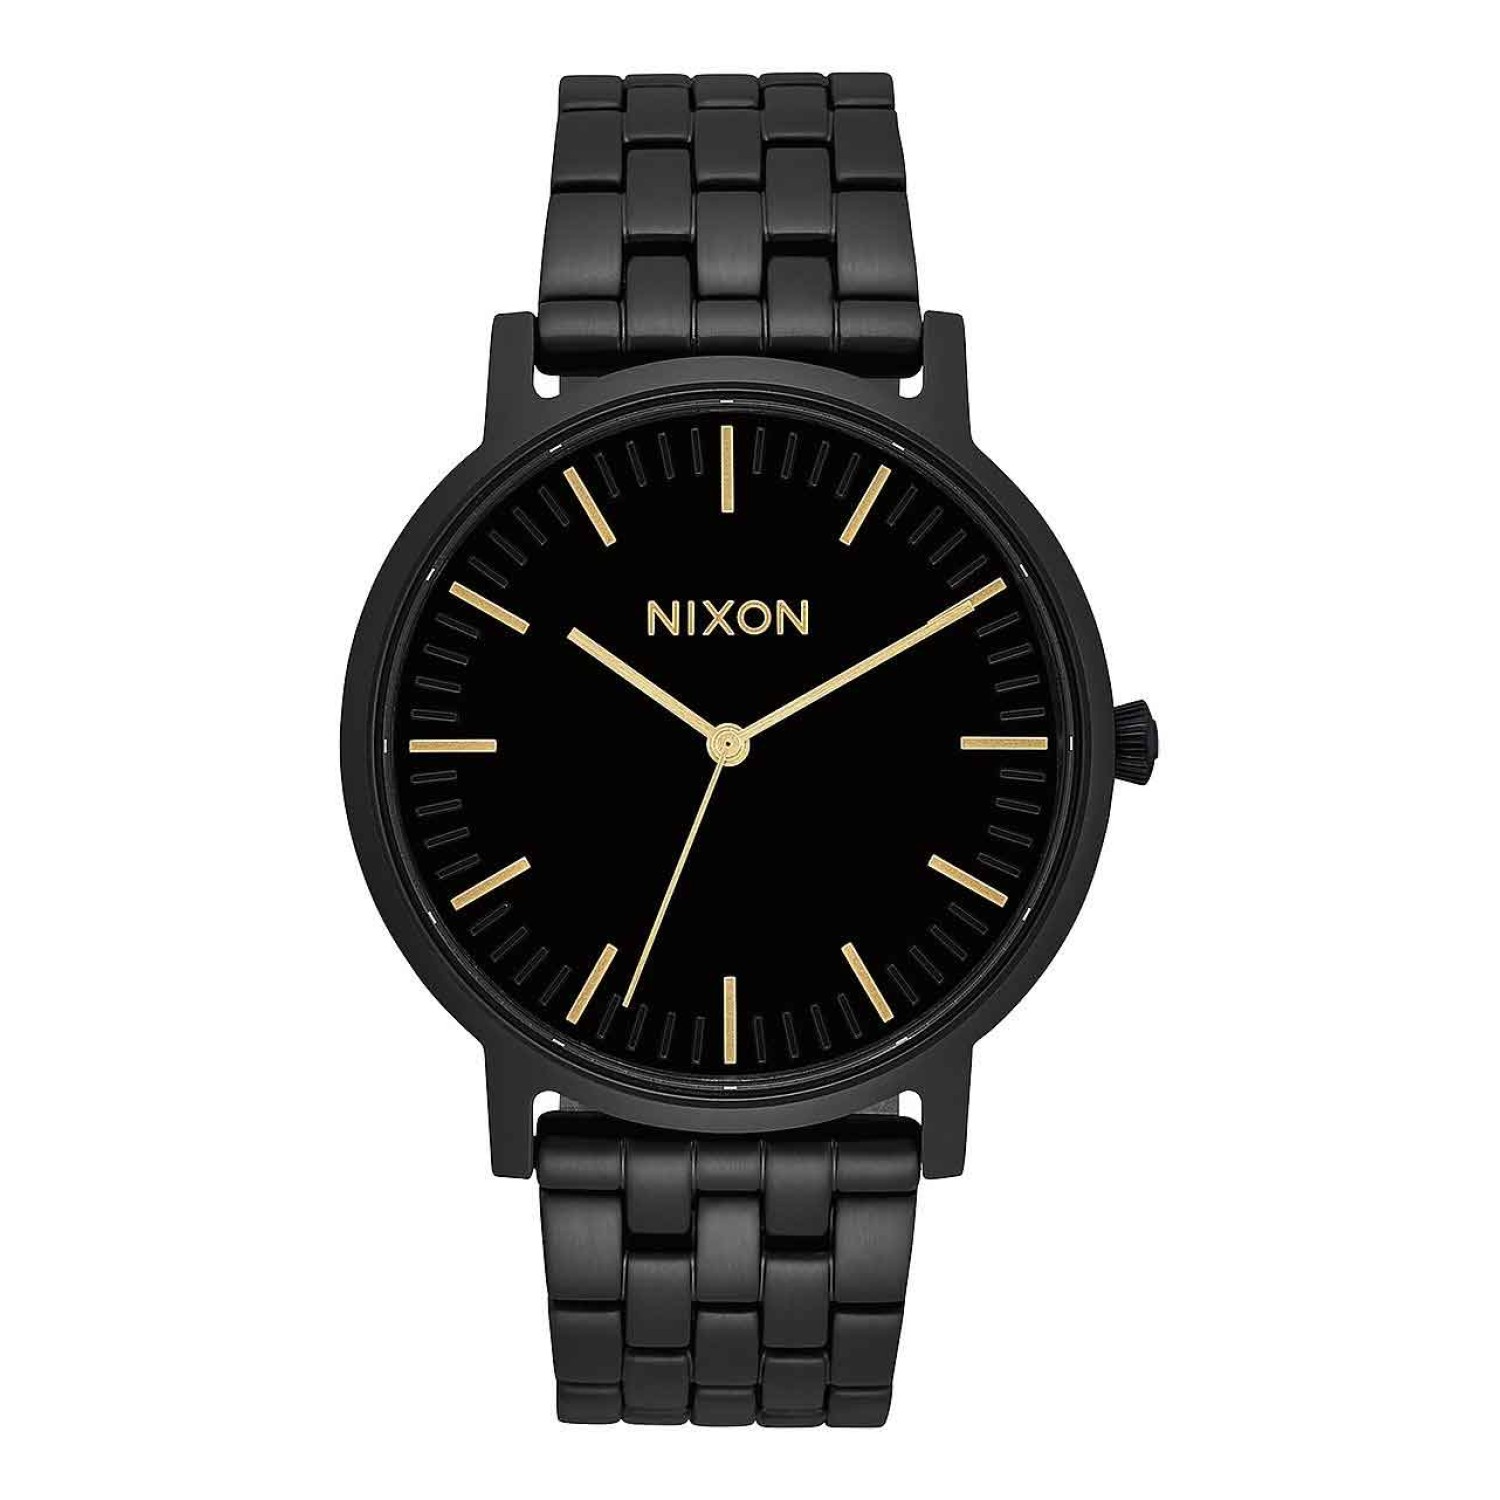 A1057-1031-00 NIXON Womens Porter Watch. Forward in thinking but rooted in traditional style, The Porter’s bold printed dial makes a statement without all of the excess. 2 Year  Guarantee Oxipay is simply the easier way to pay - use Oxipay and well s @chr